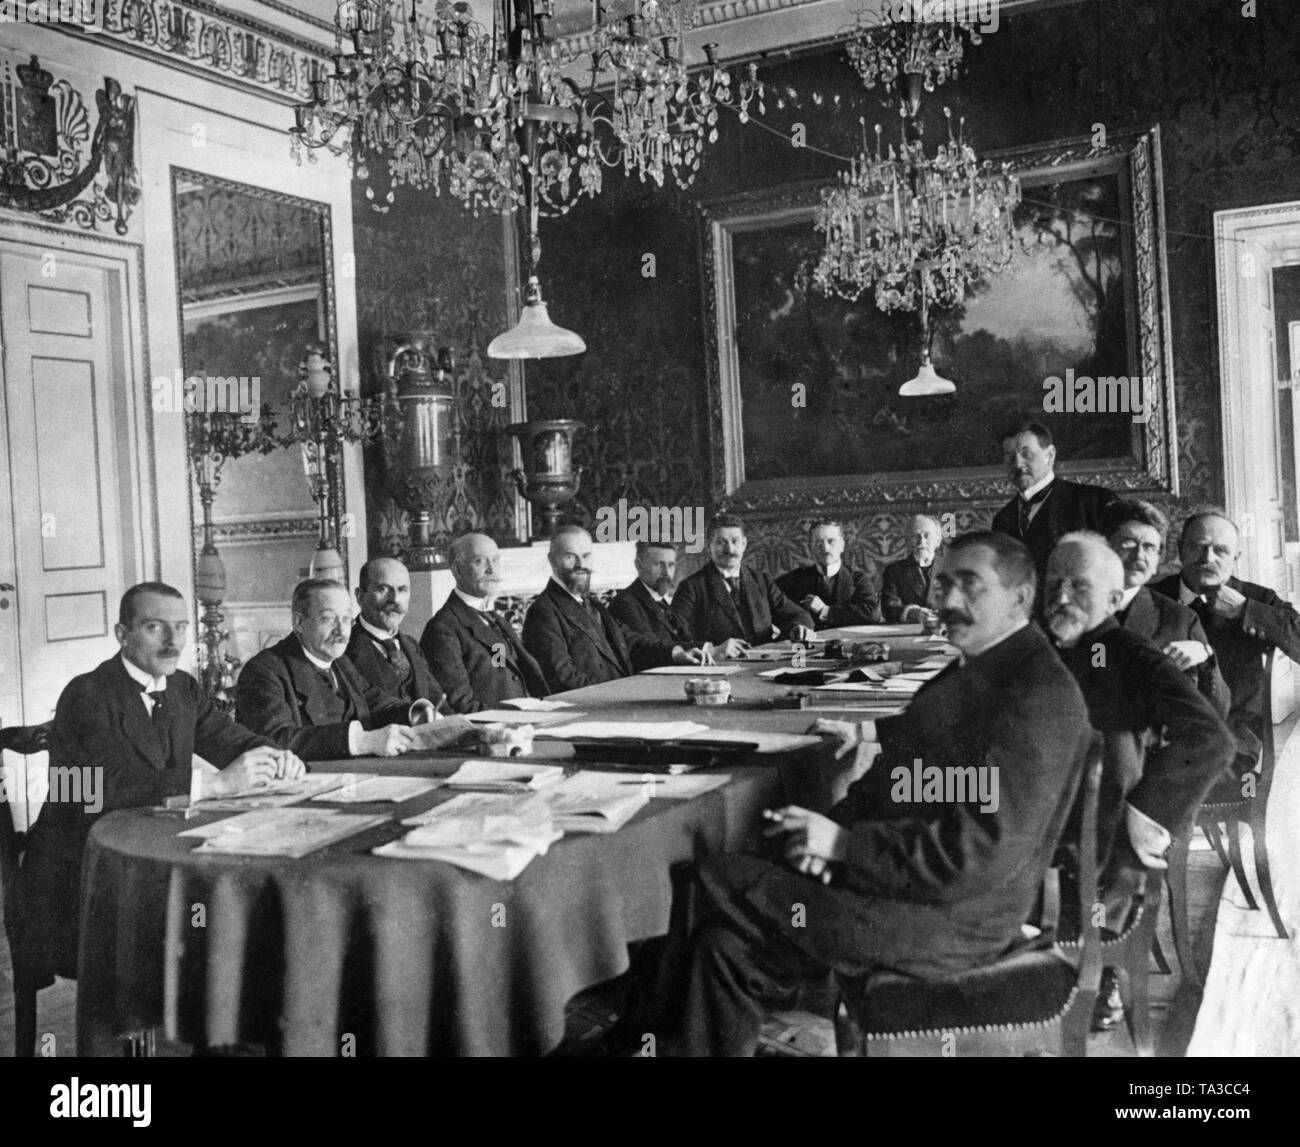 The first cabinet meeting of the Scheidemann Cabinet on February 13, 1919. From left: Ulrich Rauscher, chief press officer, Robert Schmidt, Minister of Food, Eugen Schiffer, representative of the President and Minister of Finance, Philipp Scheidemann, President of the Reich Ministry, Otto Landsberg, Minister of Justice, Rudolf Wissell, Minister of Economics, Gustav Bauer, Minister of Labor, Ulrich Count v. Brockdorff-Rantzau, Minister of Foreign Affairs, Eduard David, minister without portfolio, Dr. Hugo Preuss, Minister of the Interior, Johann Giesberts, Postal Minister, Dr. Johannes Bell, Stock Photo